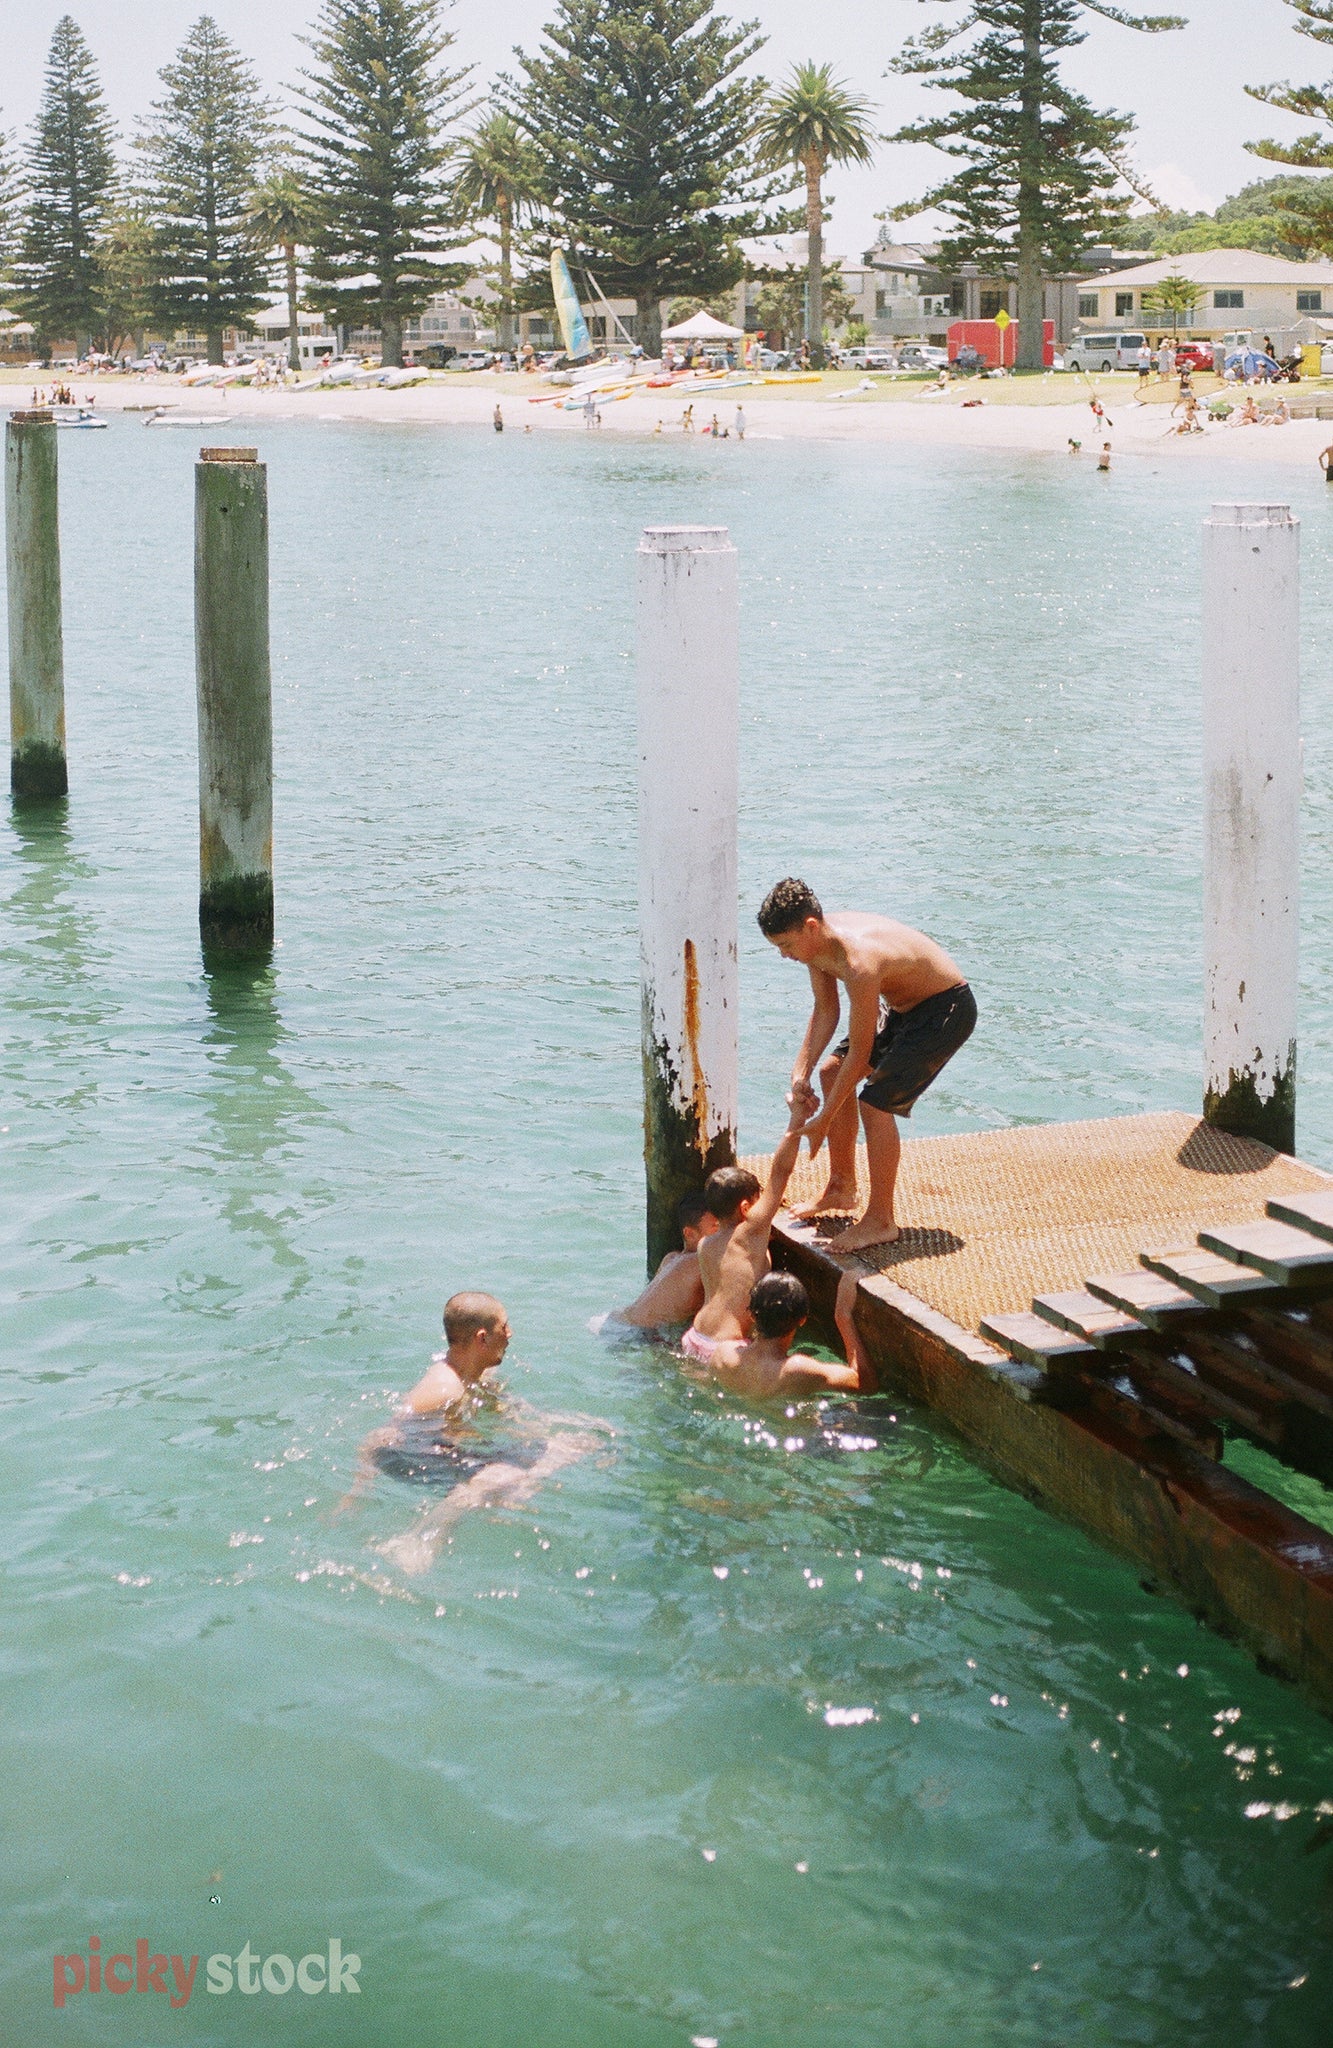 Children help each other up out of the water towards the jetty in mid summer.